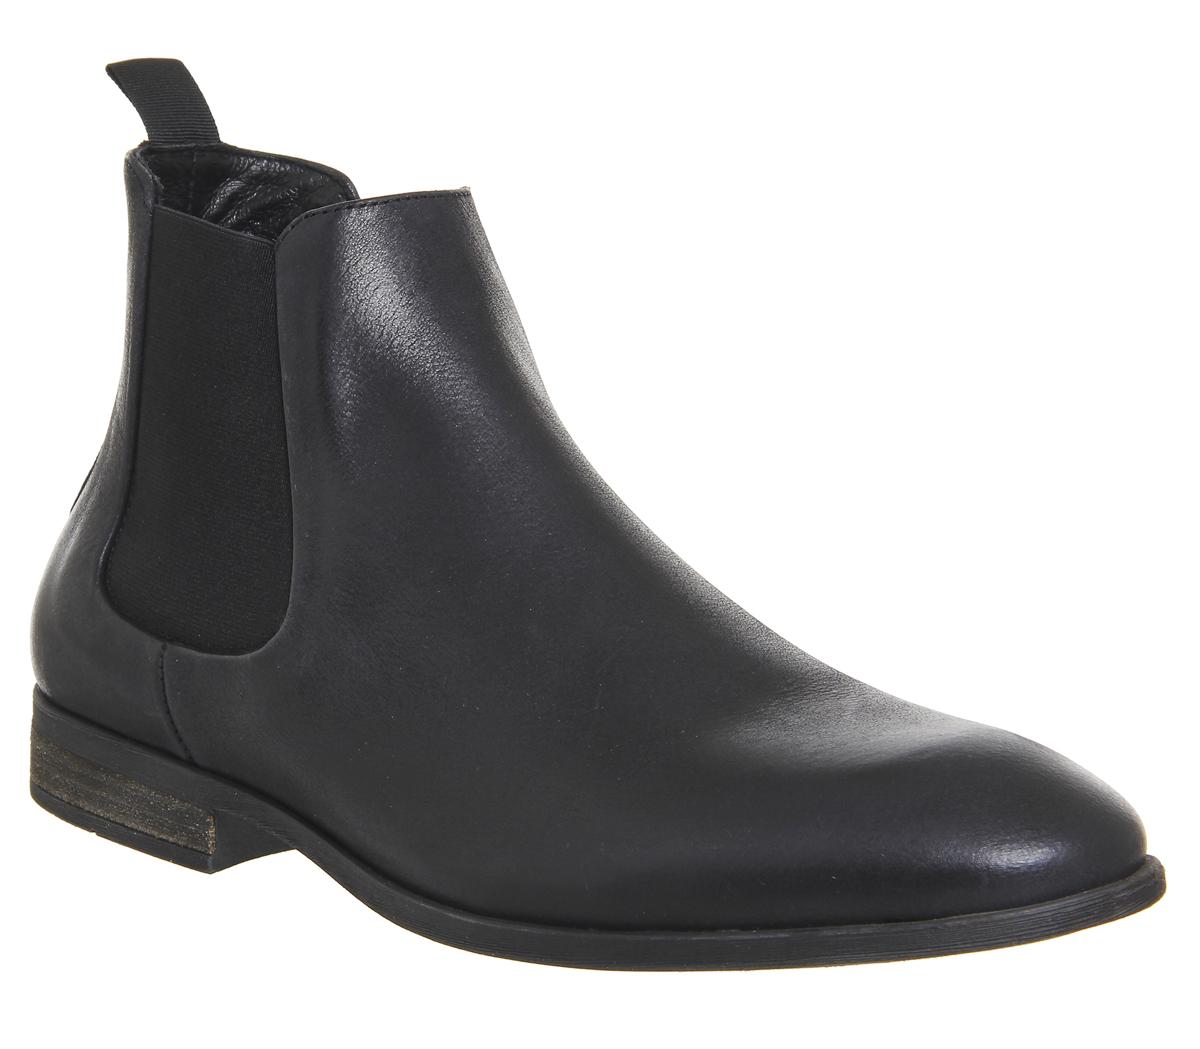 Ask the Missus Etta Chelsea Boots Black Nubuck - Boots